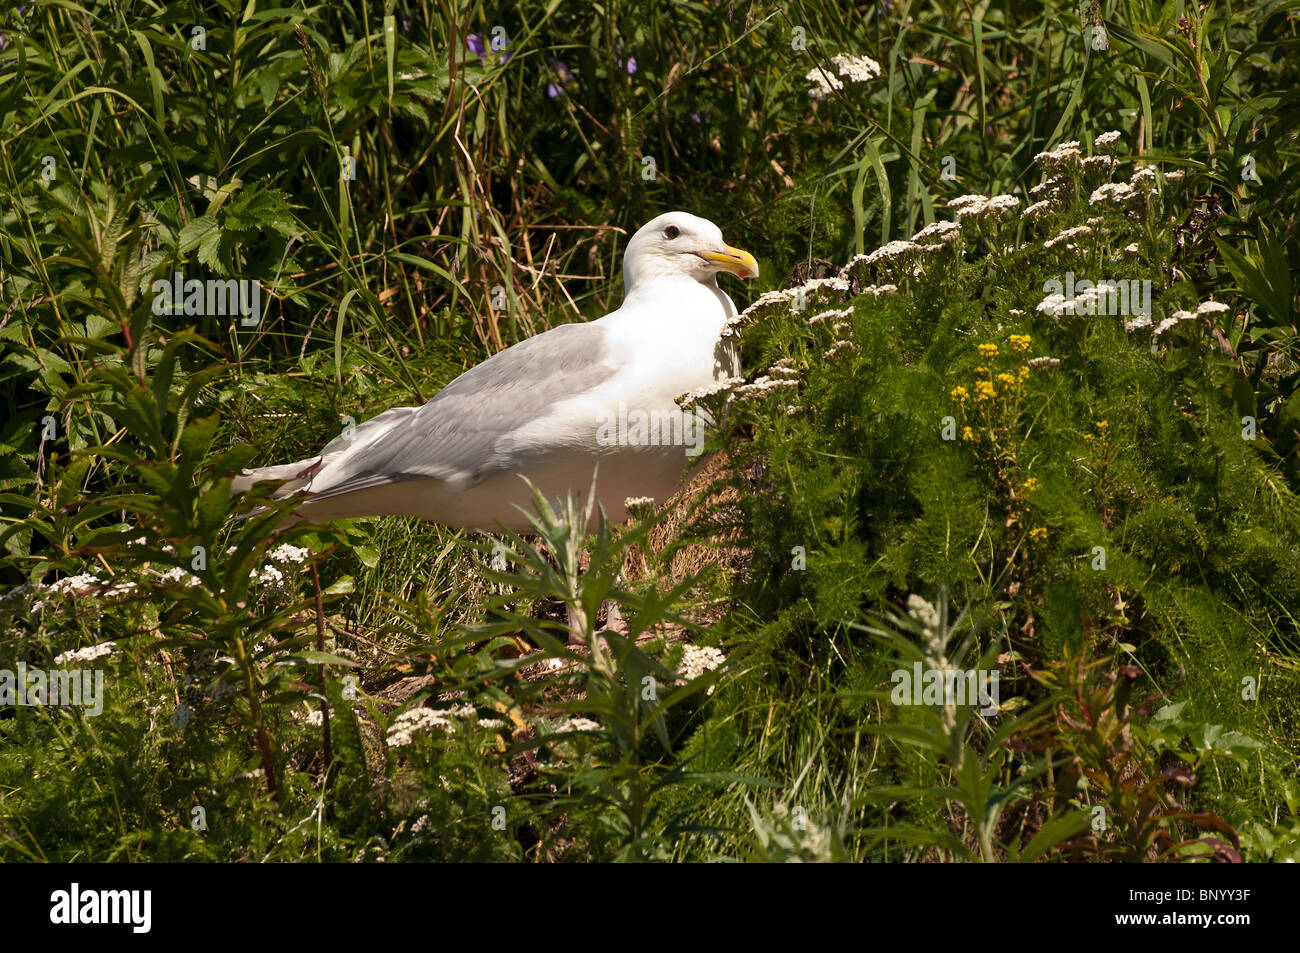 Stock photo of a glaucous-winged gull standing in vegetation. Stock Photo